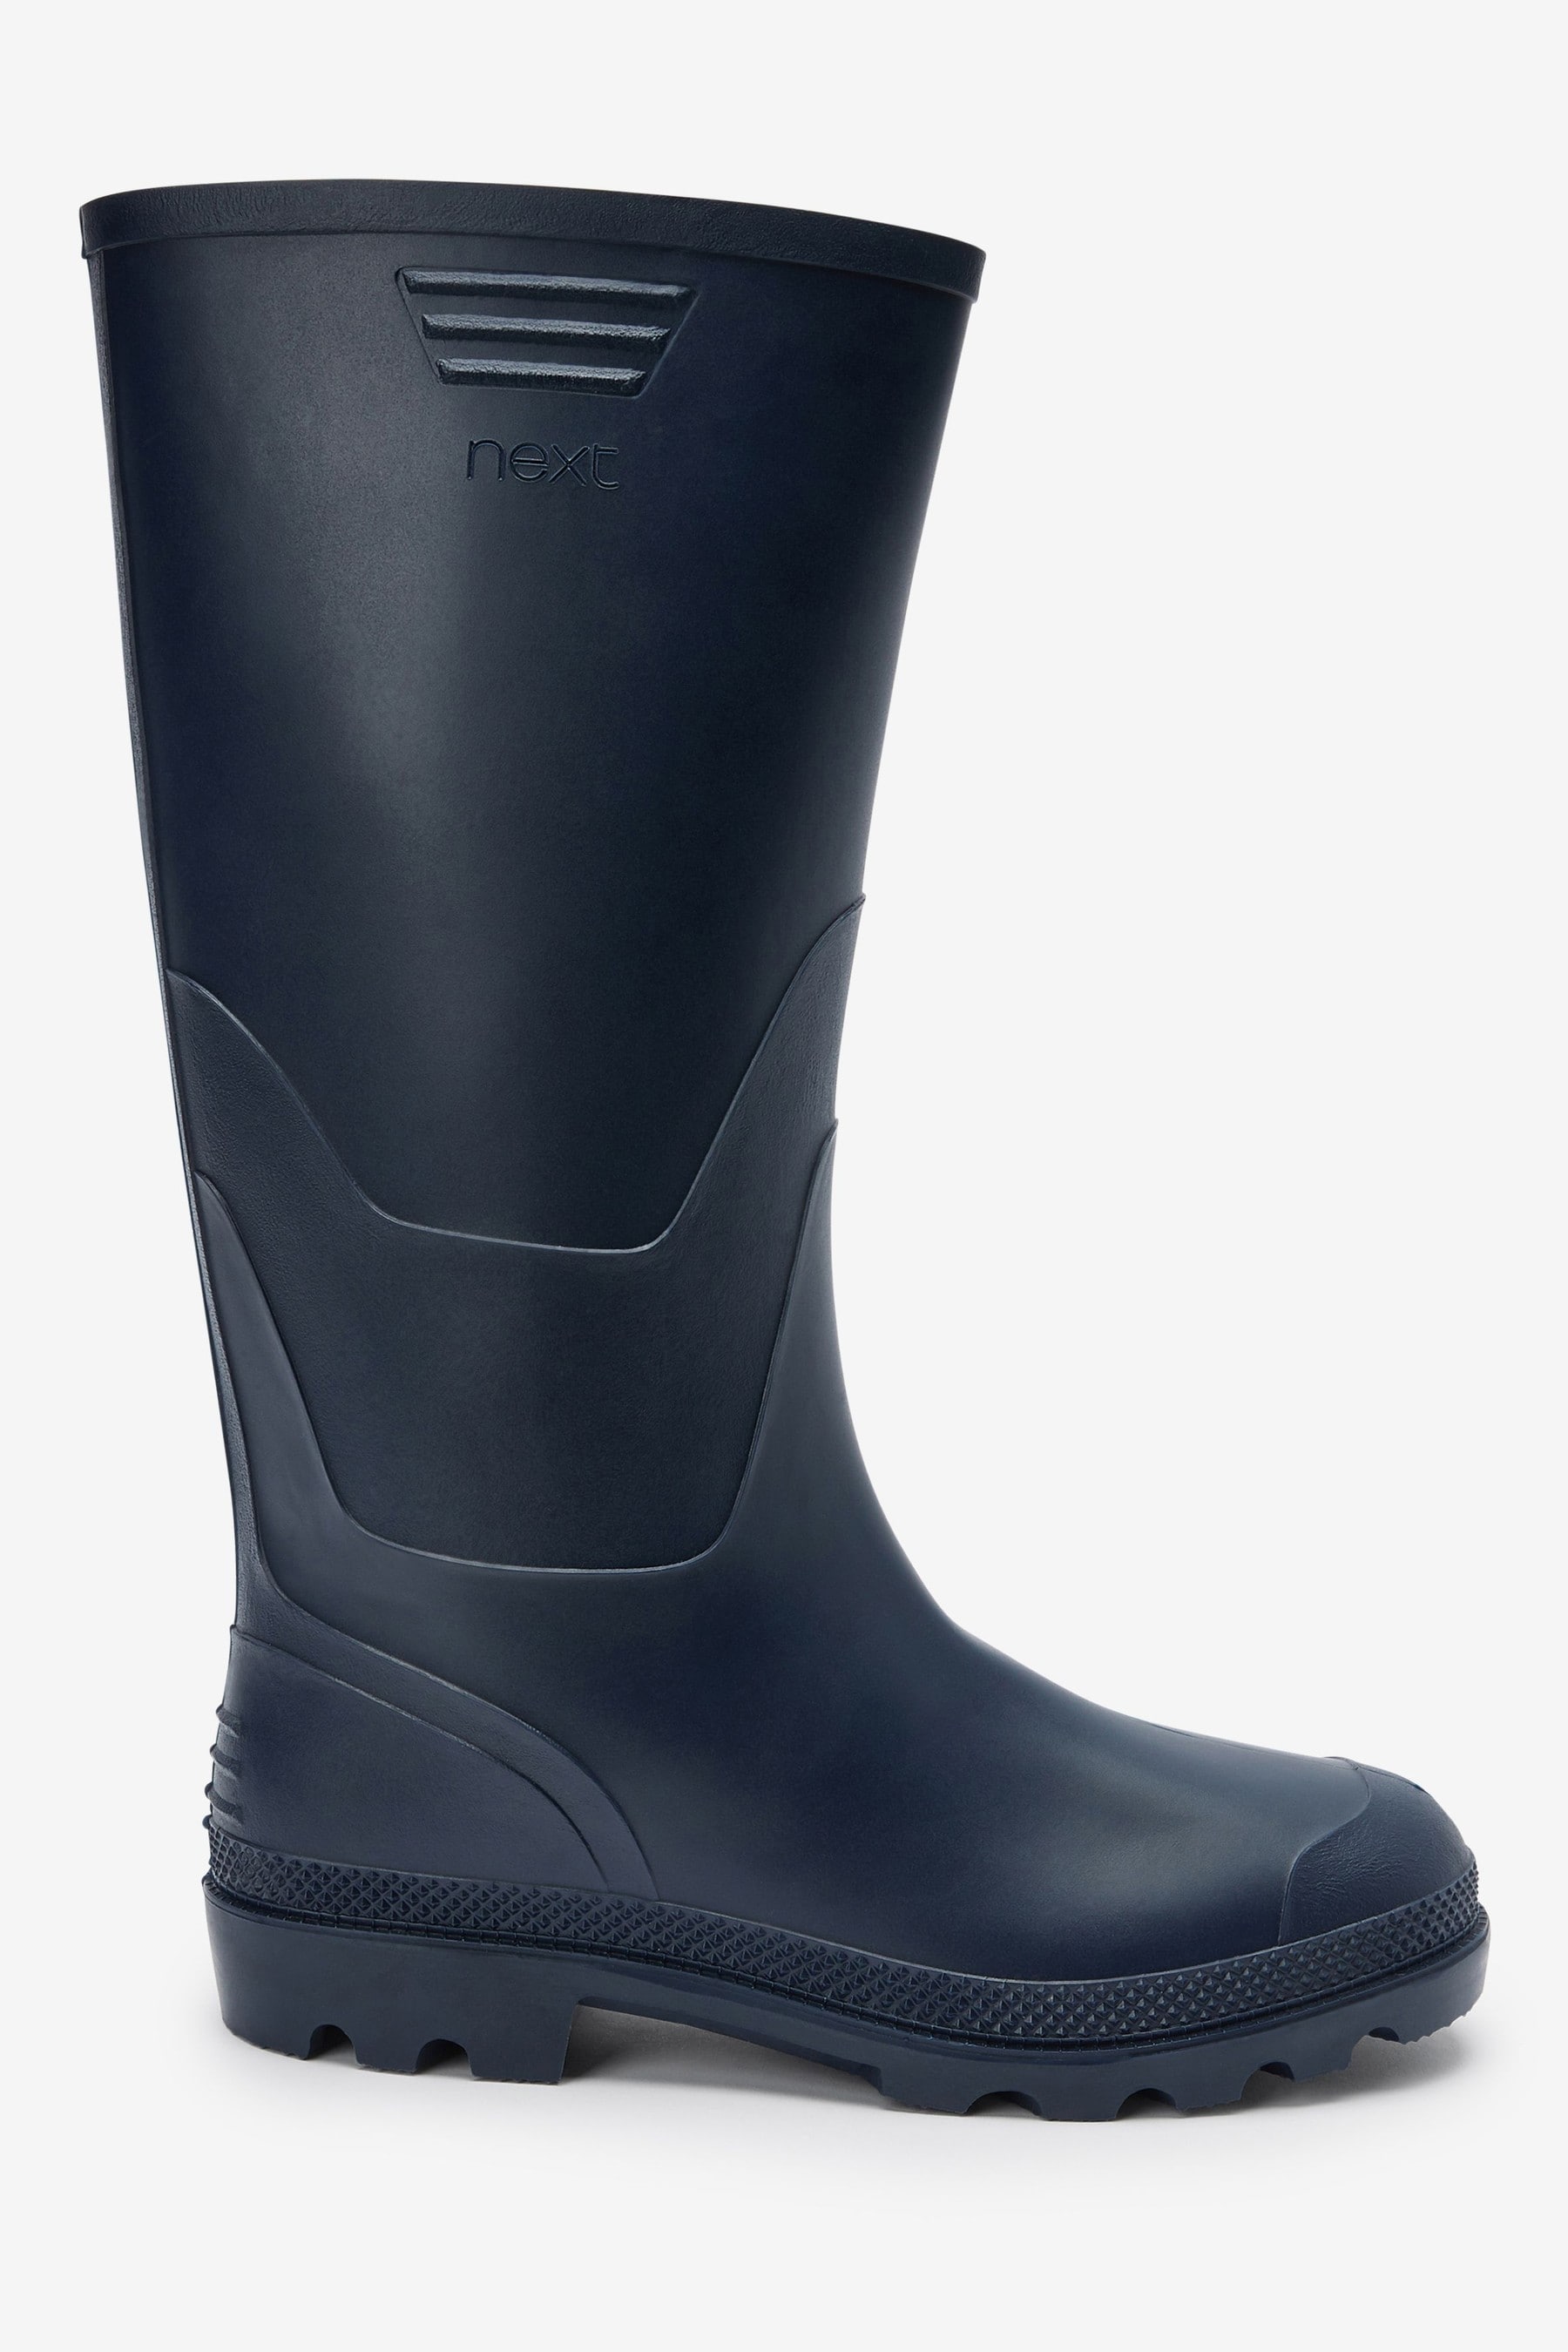 Buy Navy Blue Wellington Boots from the Next UK online shop